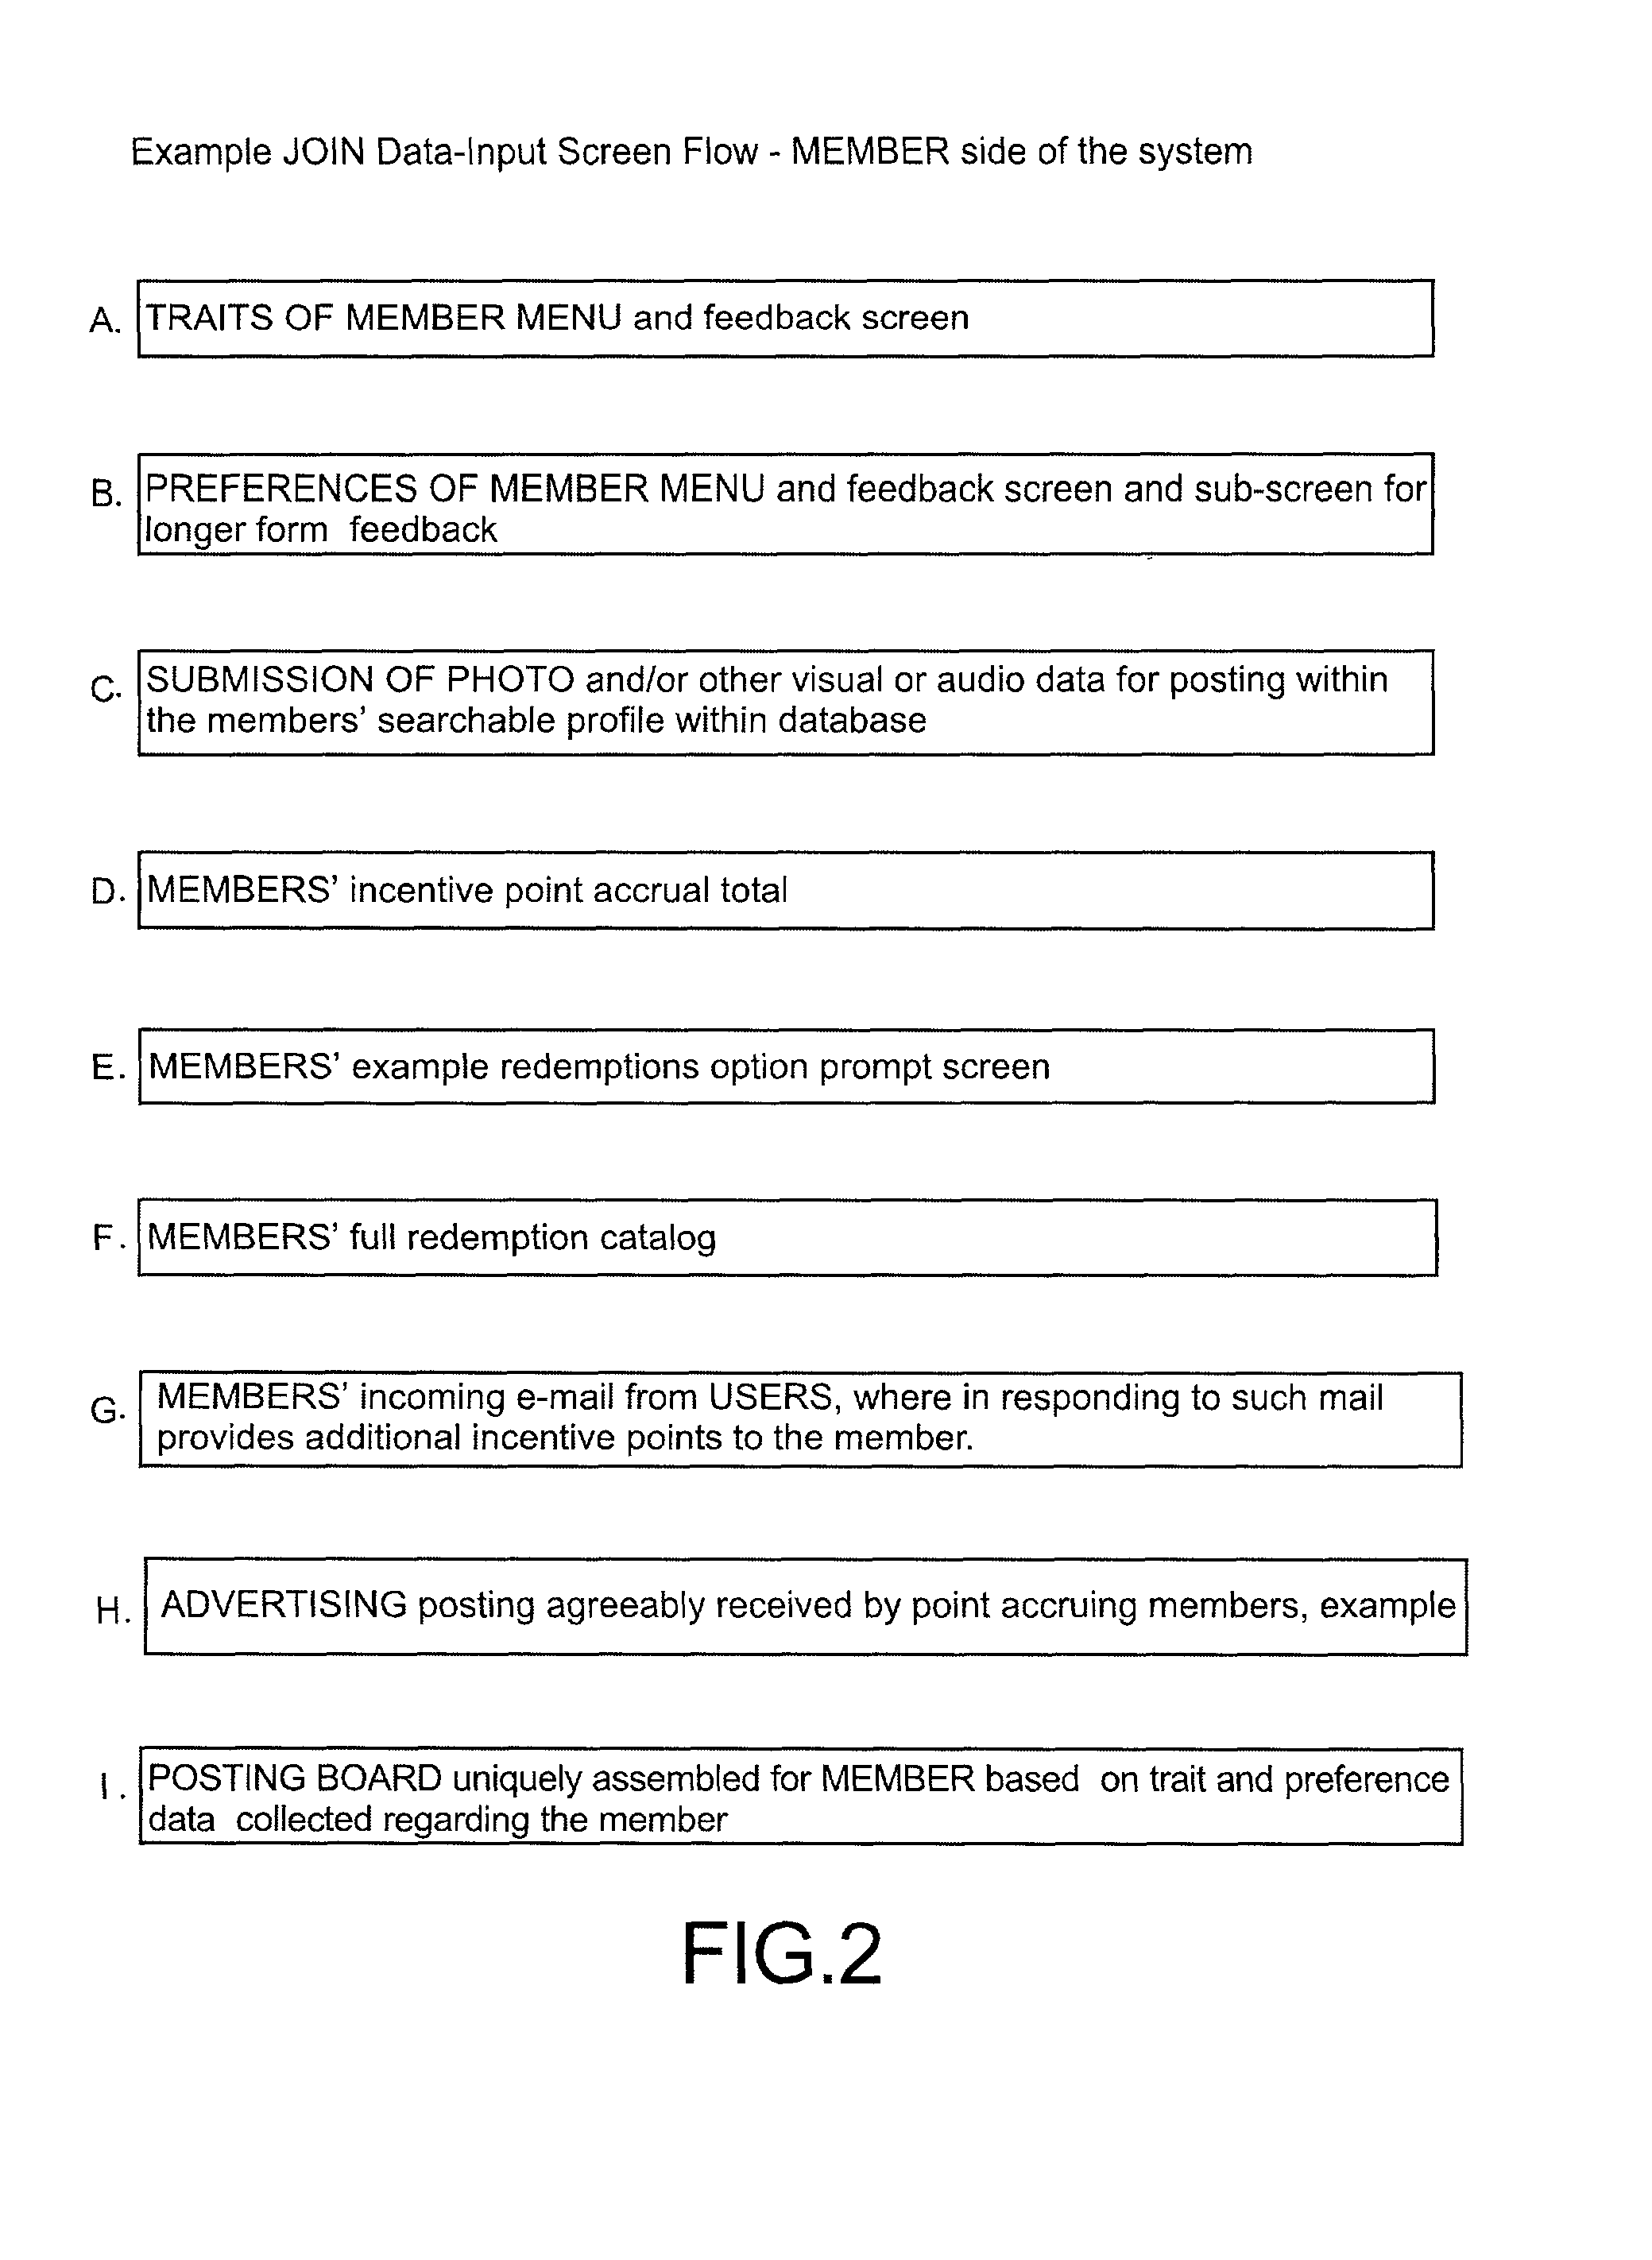 Method and system for compiling a consumer-based electronic database, searchable according to individual internet user-defined micro-demographics